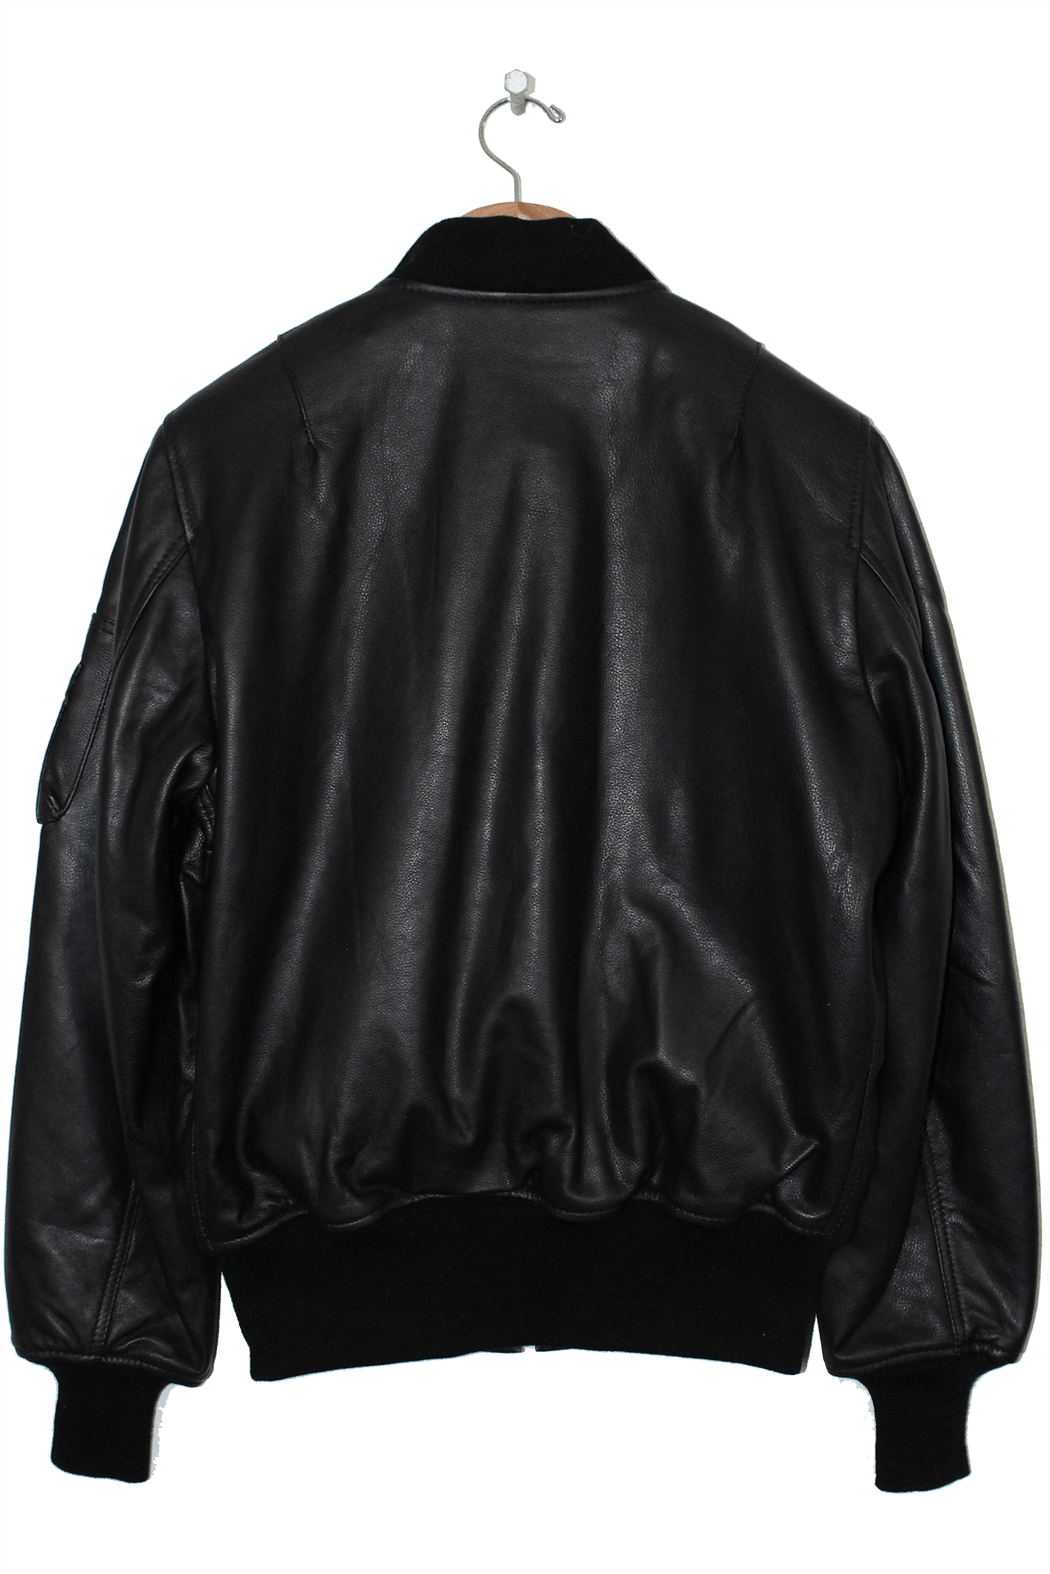 MENS LEATHER MA-1 BOMBER JACKET — Understated Leather